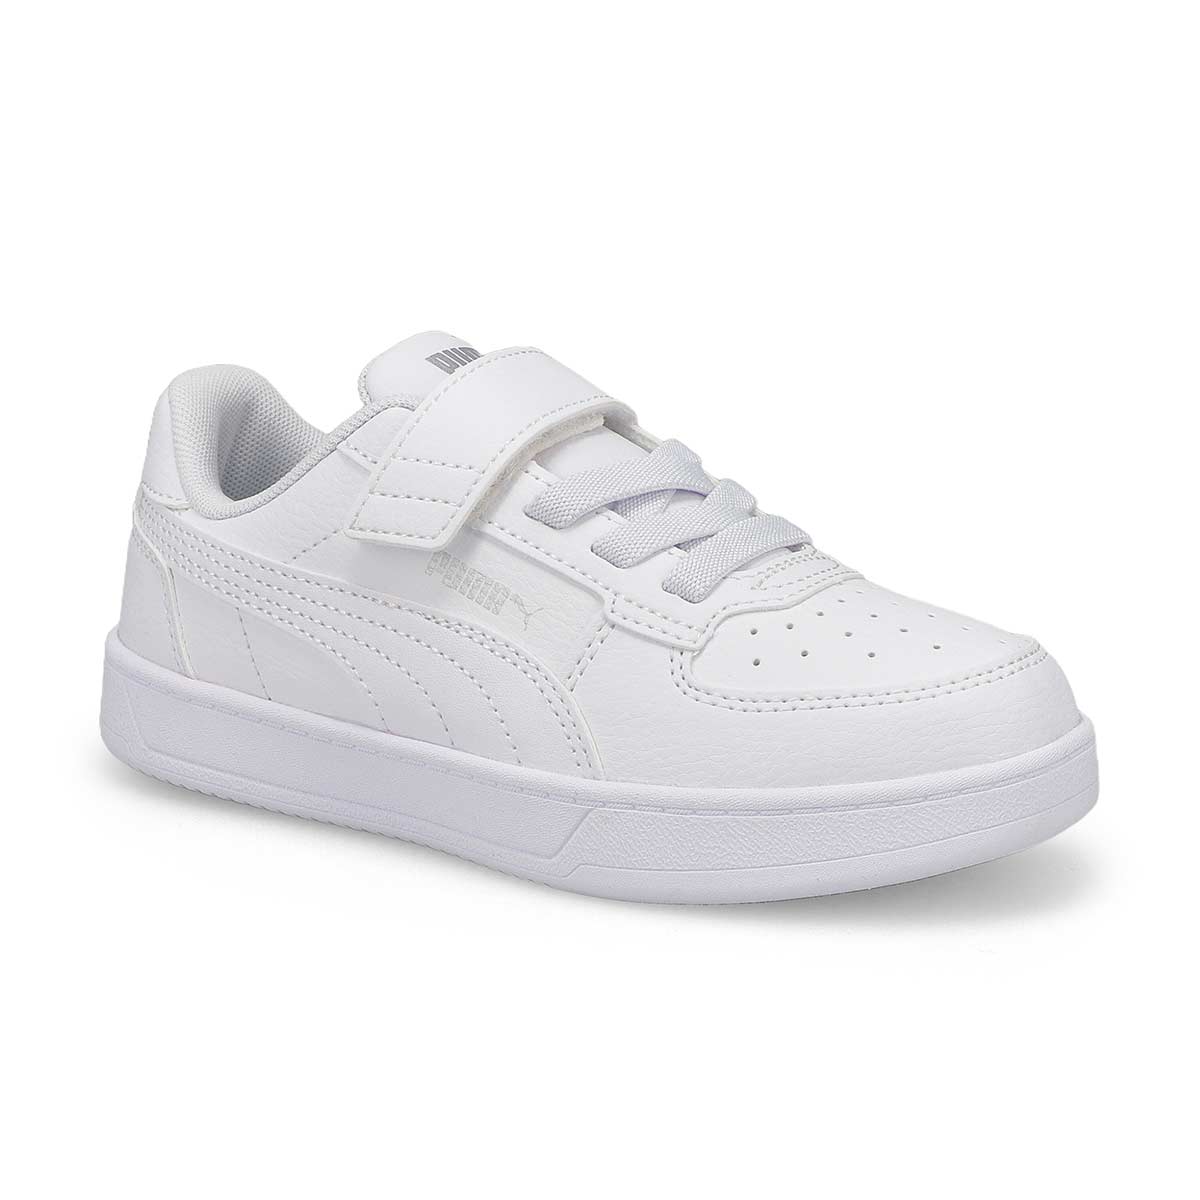 Kids' Caven 2.0 AC + PS Lace Up Sneaker - White/Silver